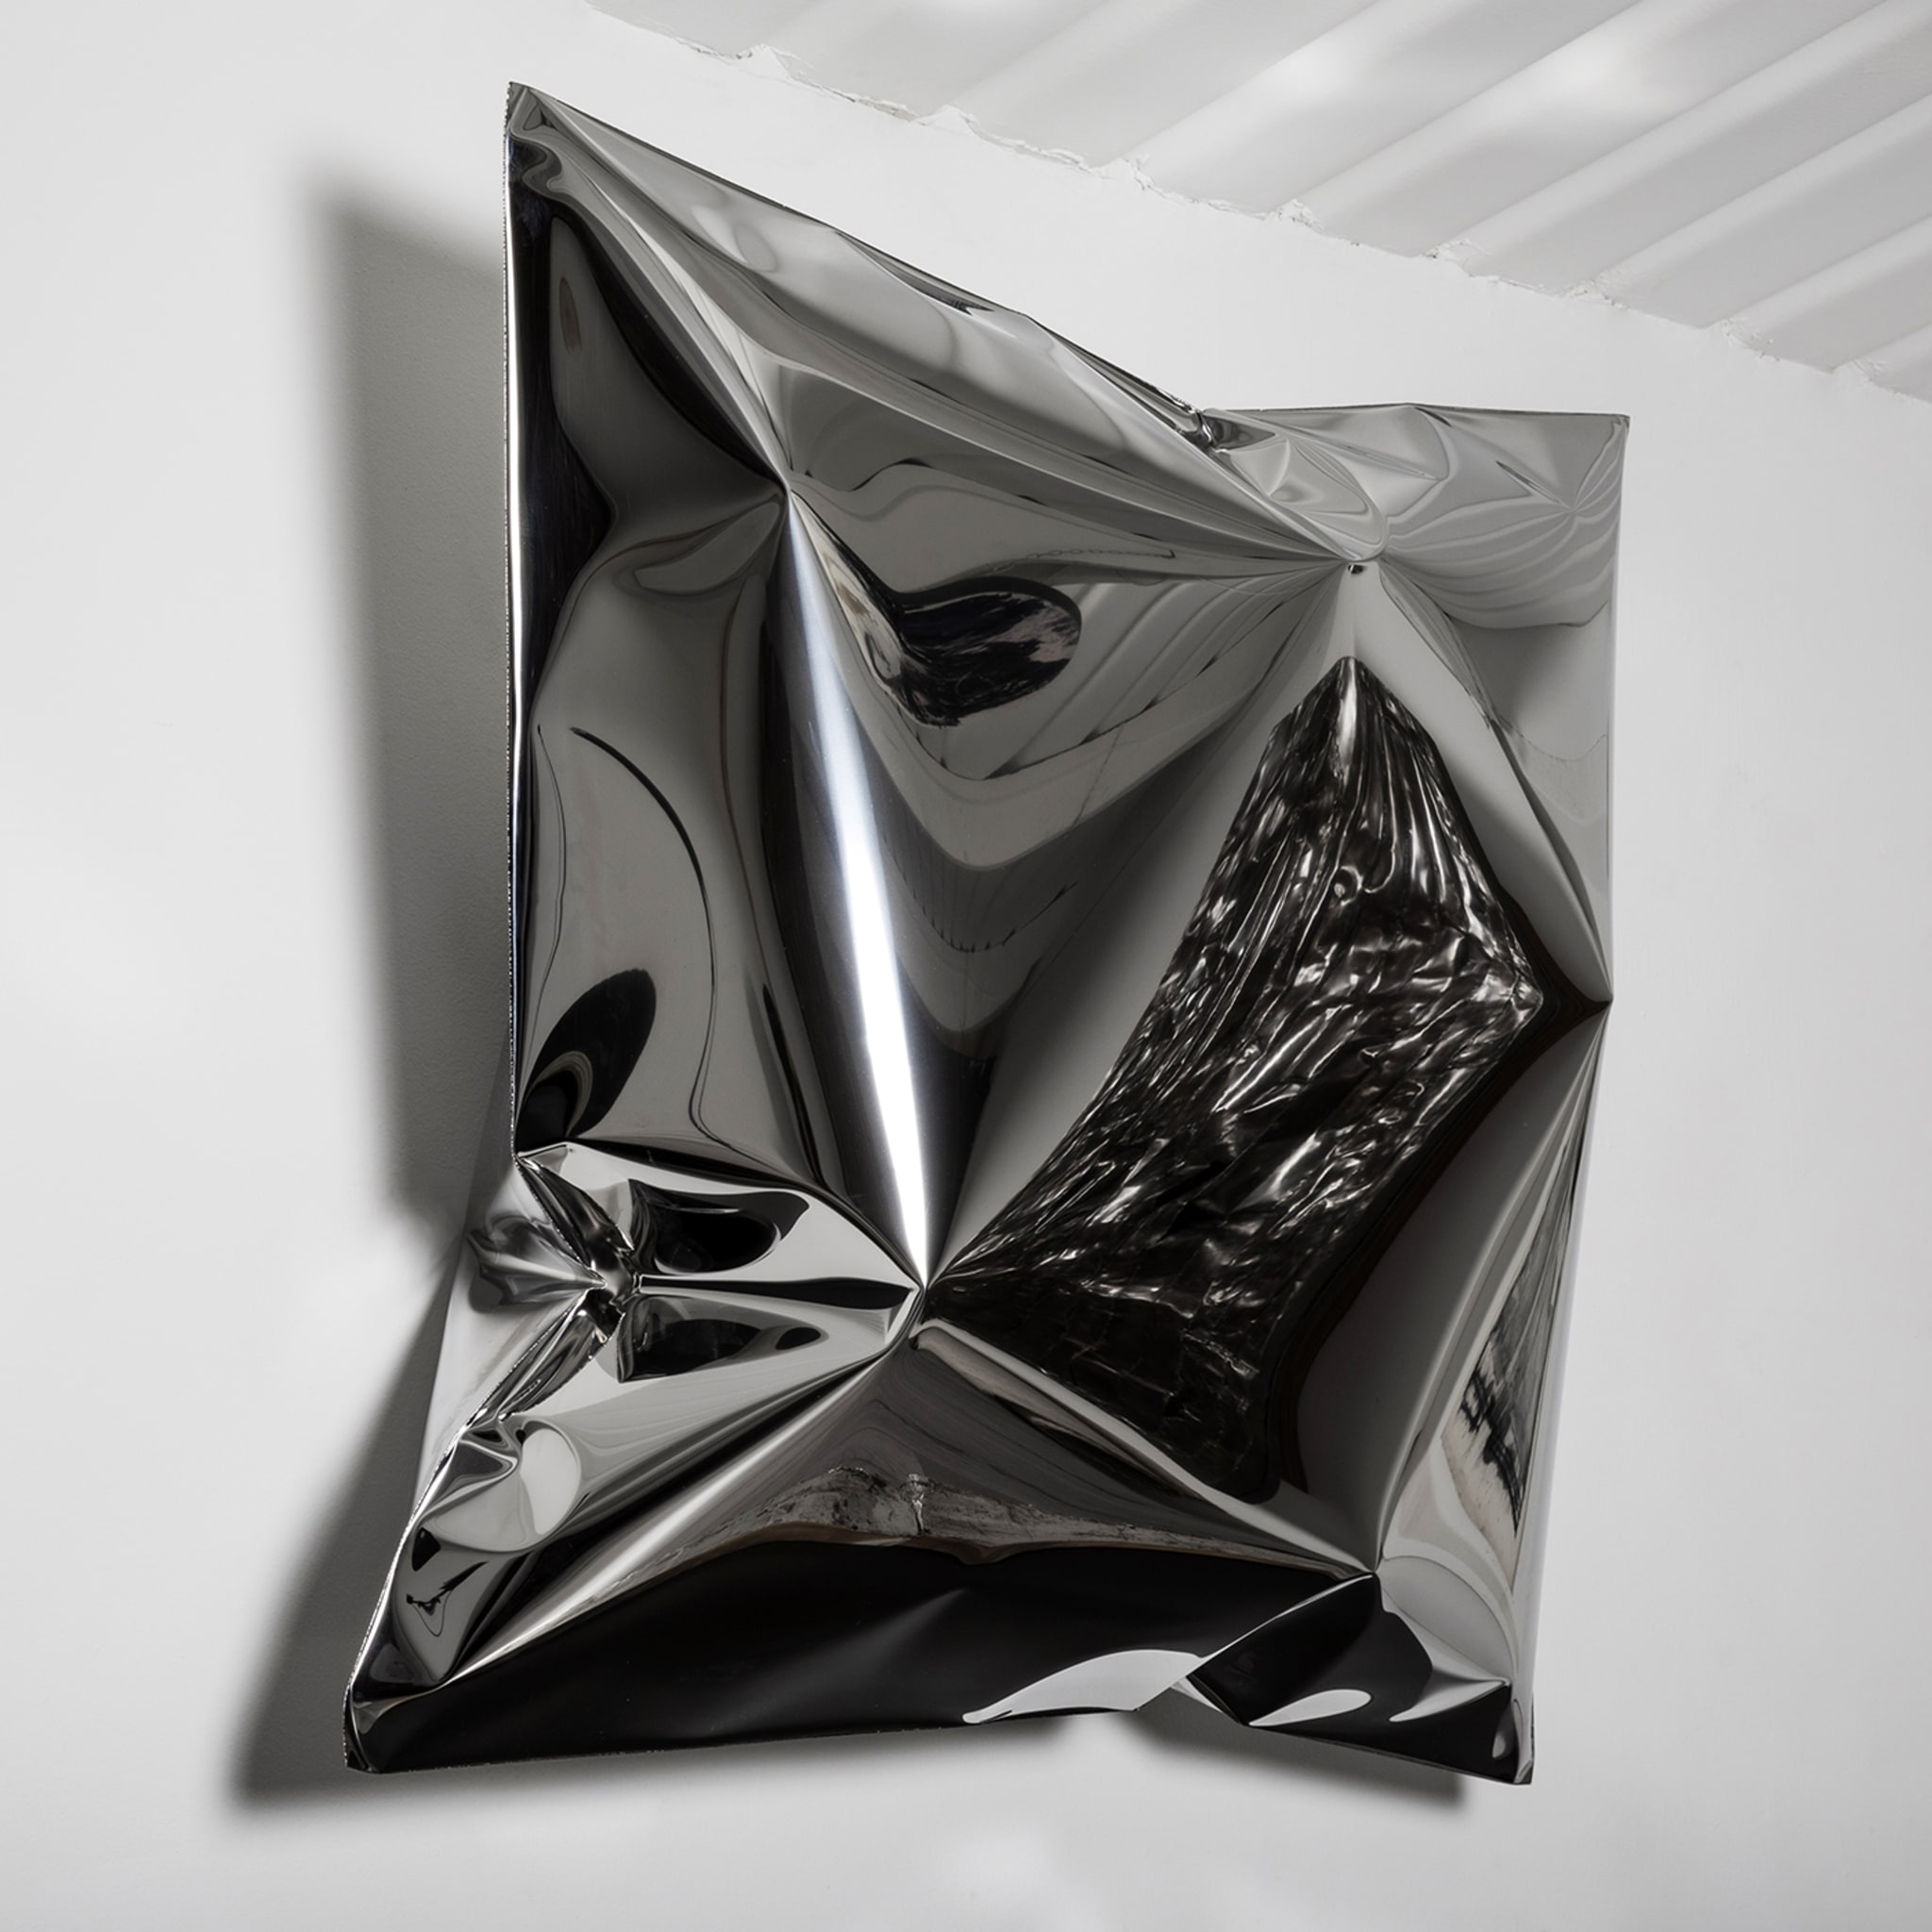 Square Silvery Pillow-Shaped Wall Sculpture - Alternative view 2